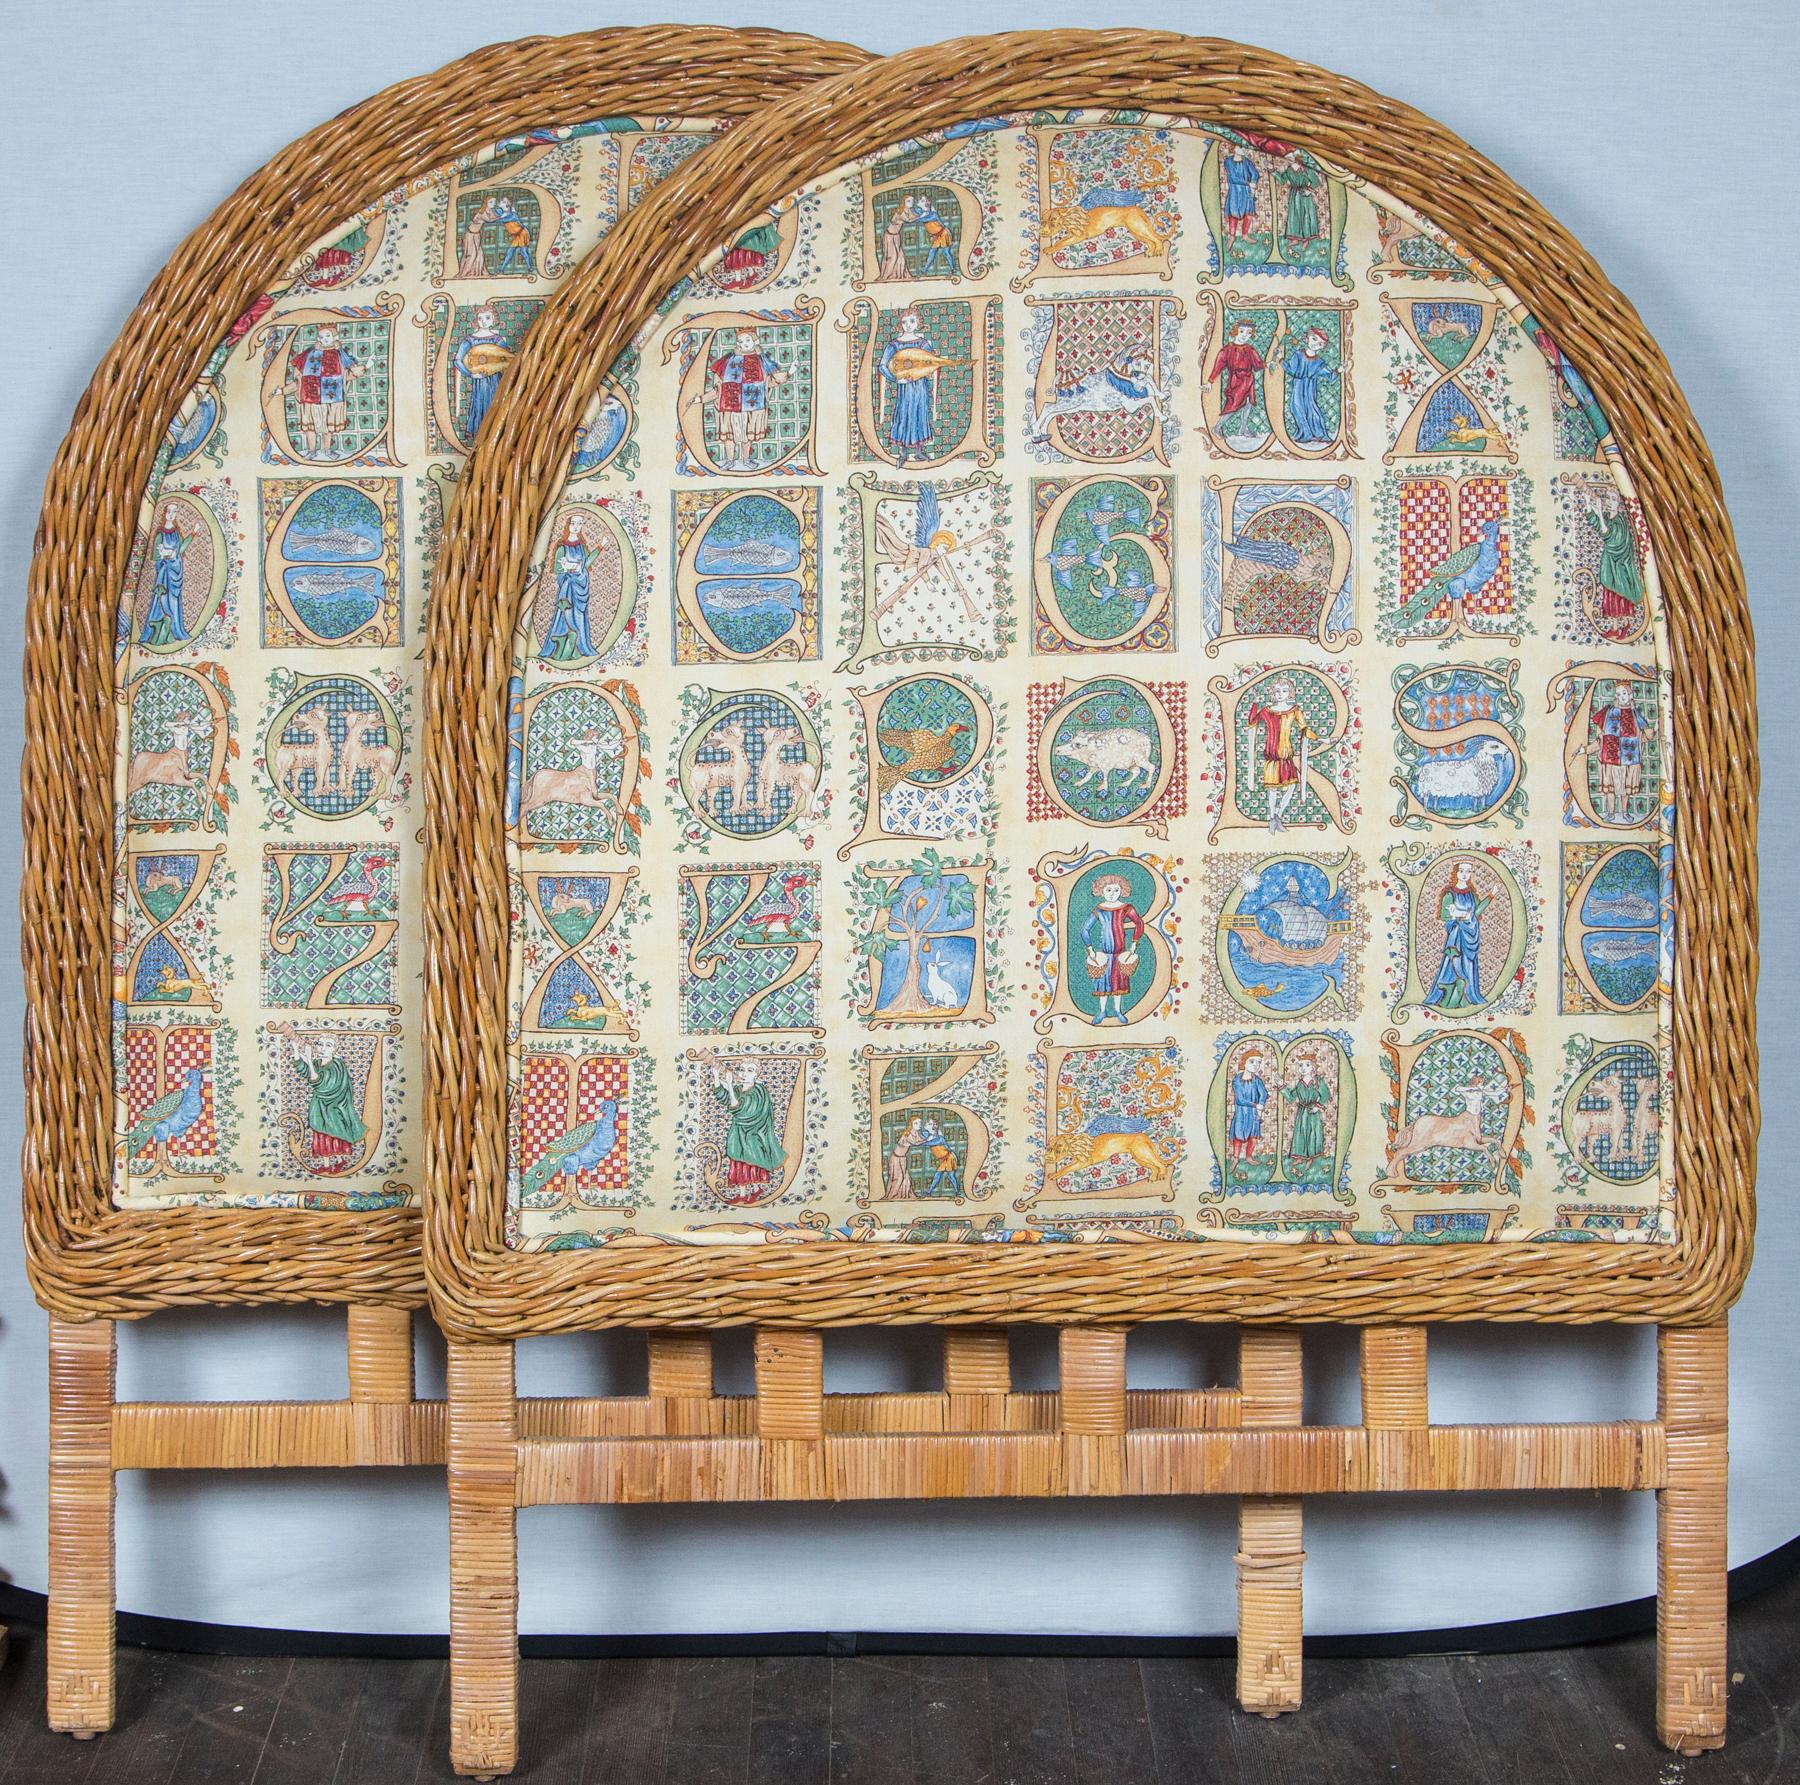 A pair of tall upholstered twin size headboards with thick woven wicker trim and rattan wrapped legs. Upholstery is in good condition. Renaissance style illustrated alphabet fabric.